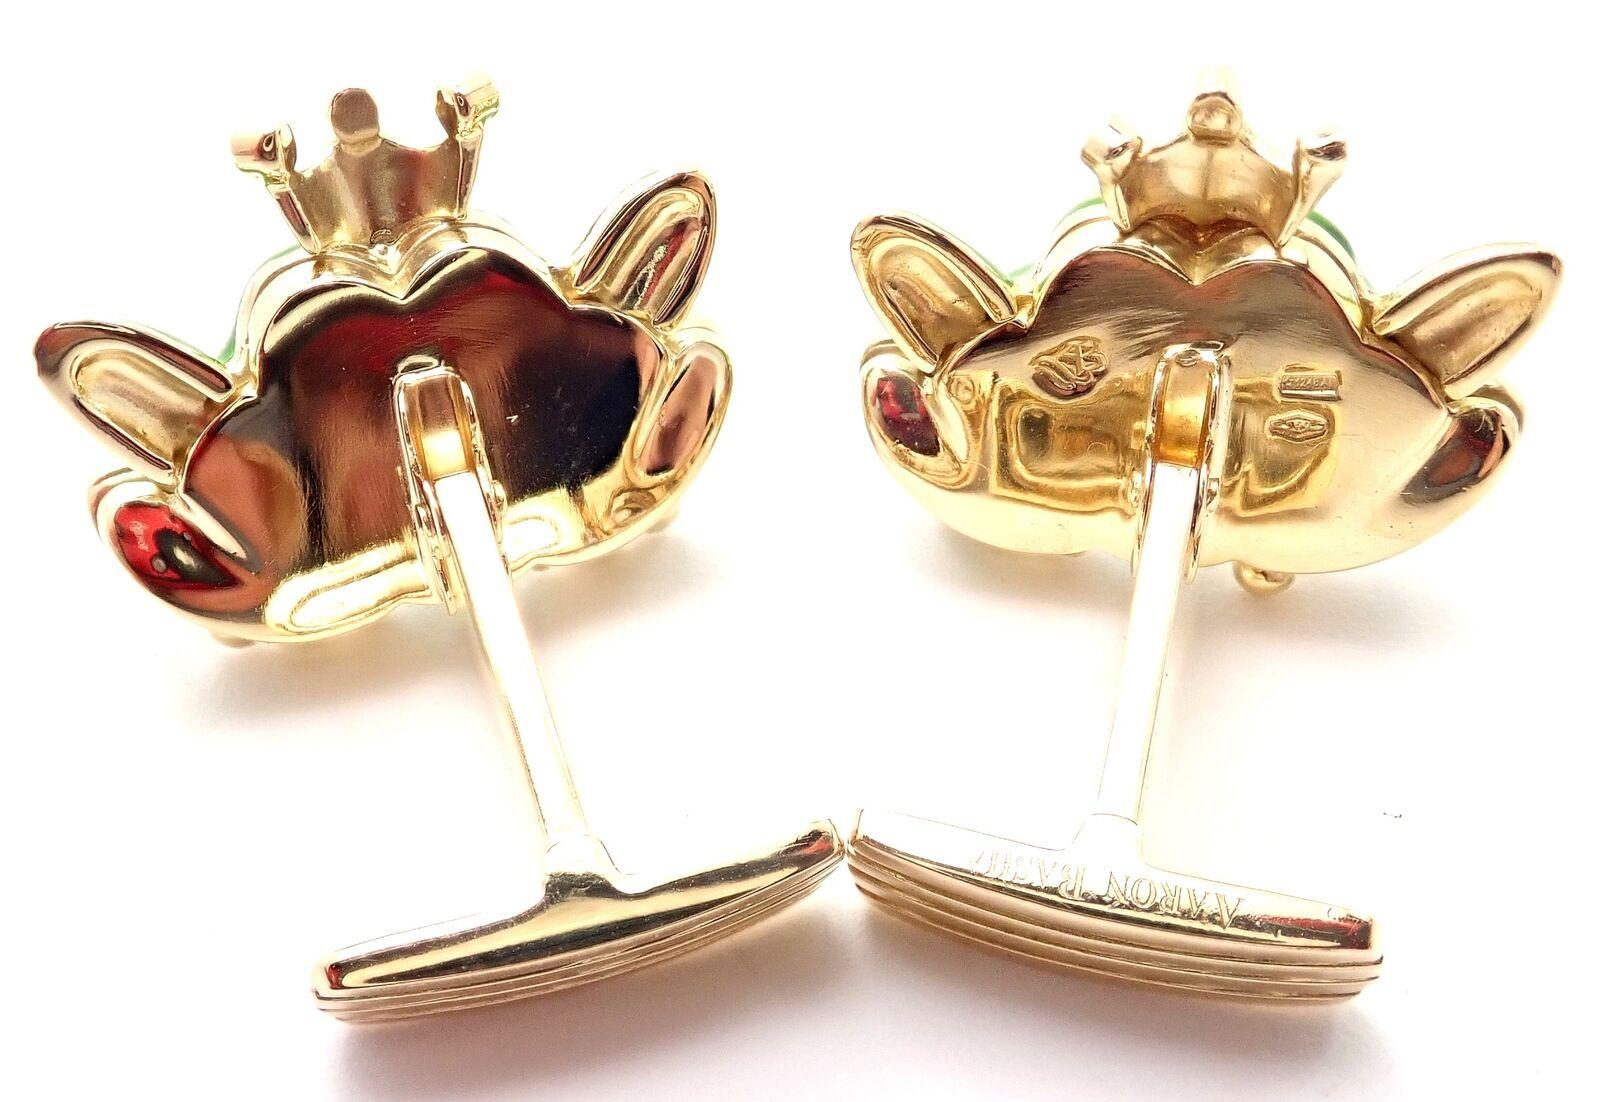 18k Yellow Gold Diamond Green Enamel Frog Prince Cufflinks by Aaron Basha. 
With 6 round brilliant cut diamonds.
Details: 
Measurements: 20mm x 23mm
Weight: 28.4 grams 
Stamped Hallmarks: Aaron Basha 750
*Free Shipping within the United States*